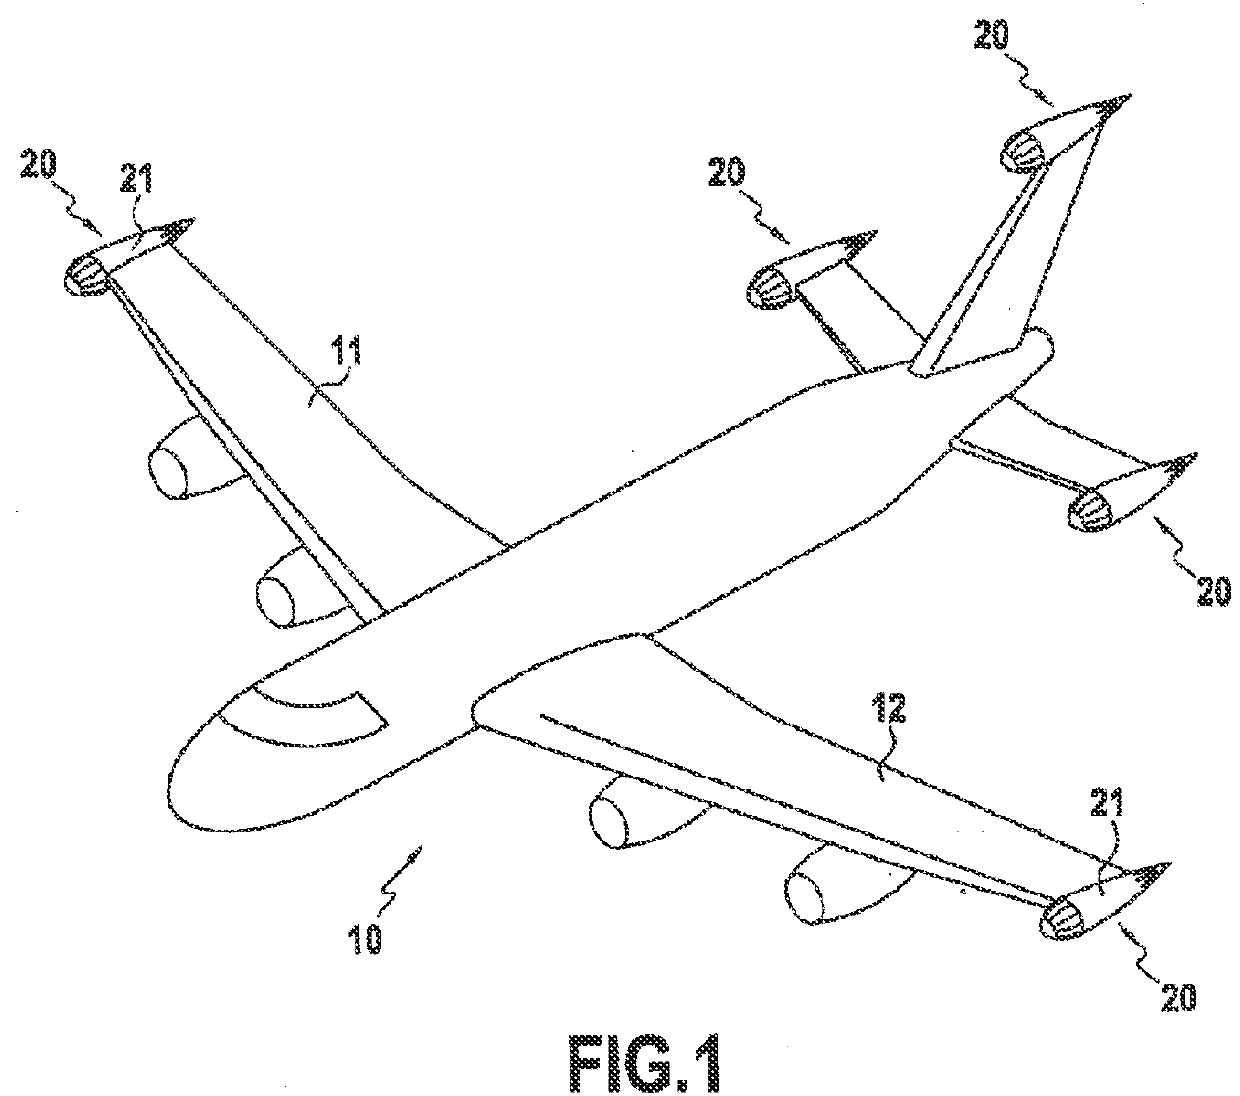 A system for recovering and converting kinetic energy and potential energy as electrical energy for an aircraft